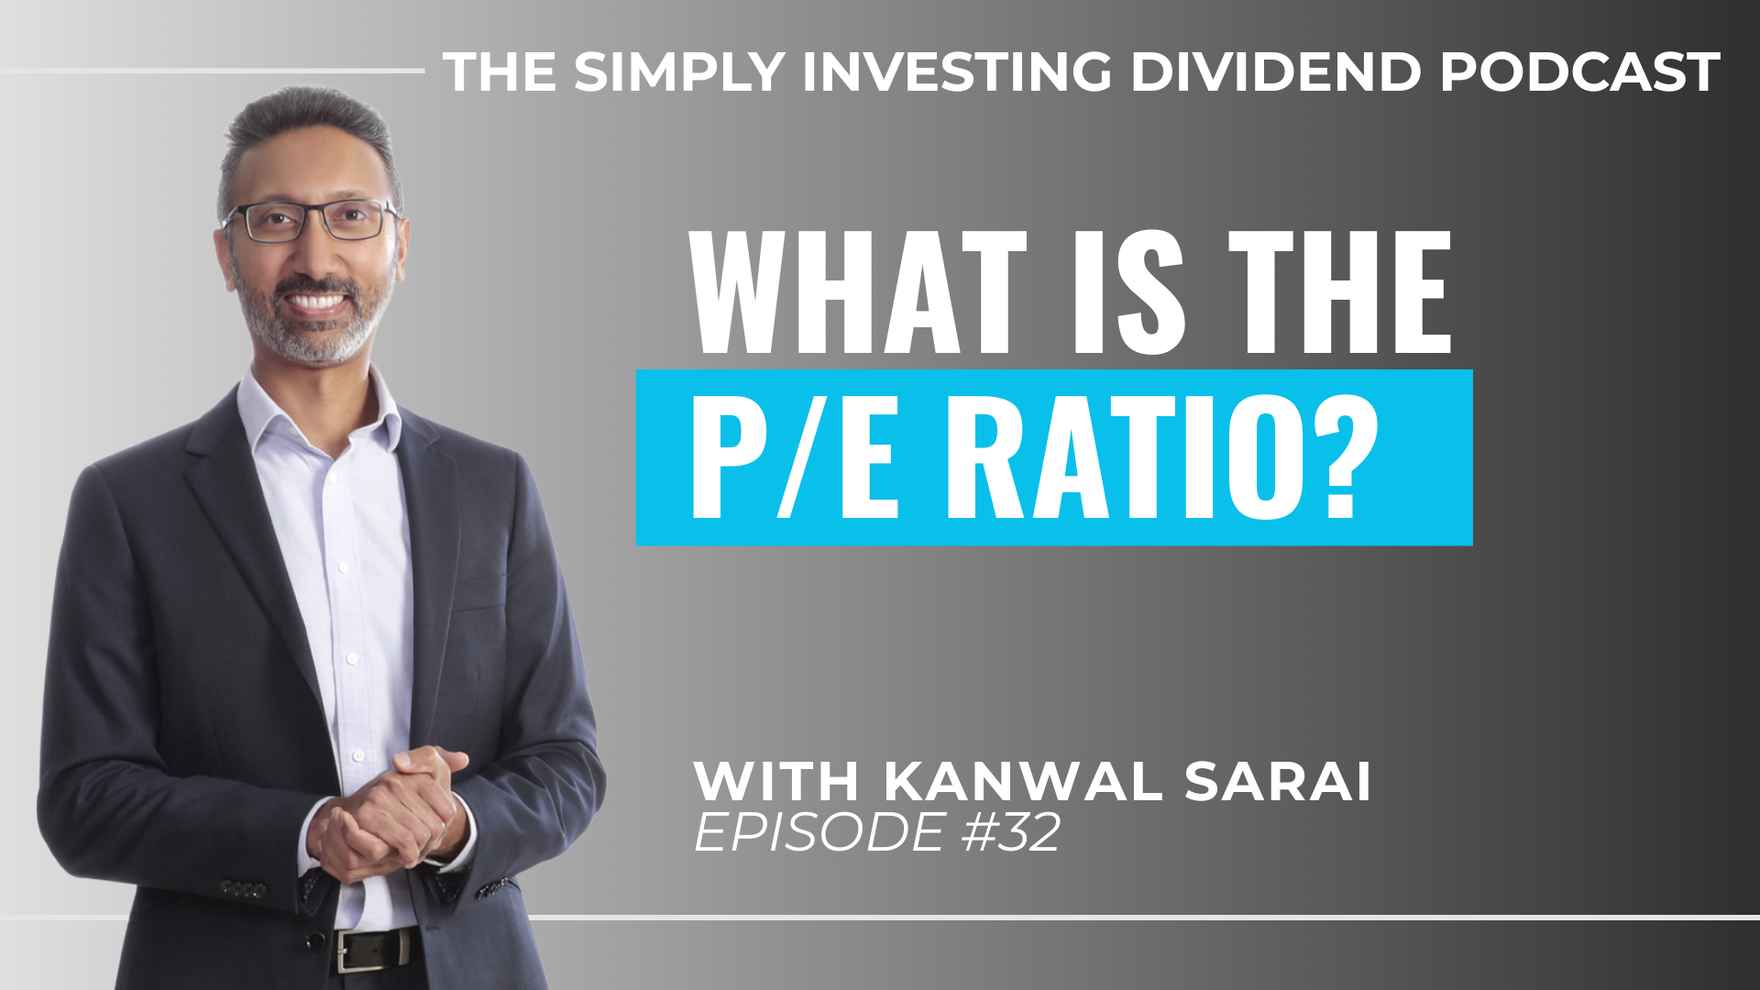 Simply Investing Dividend Podcast Episode 32 - What is the P/E Ratio?